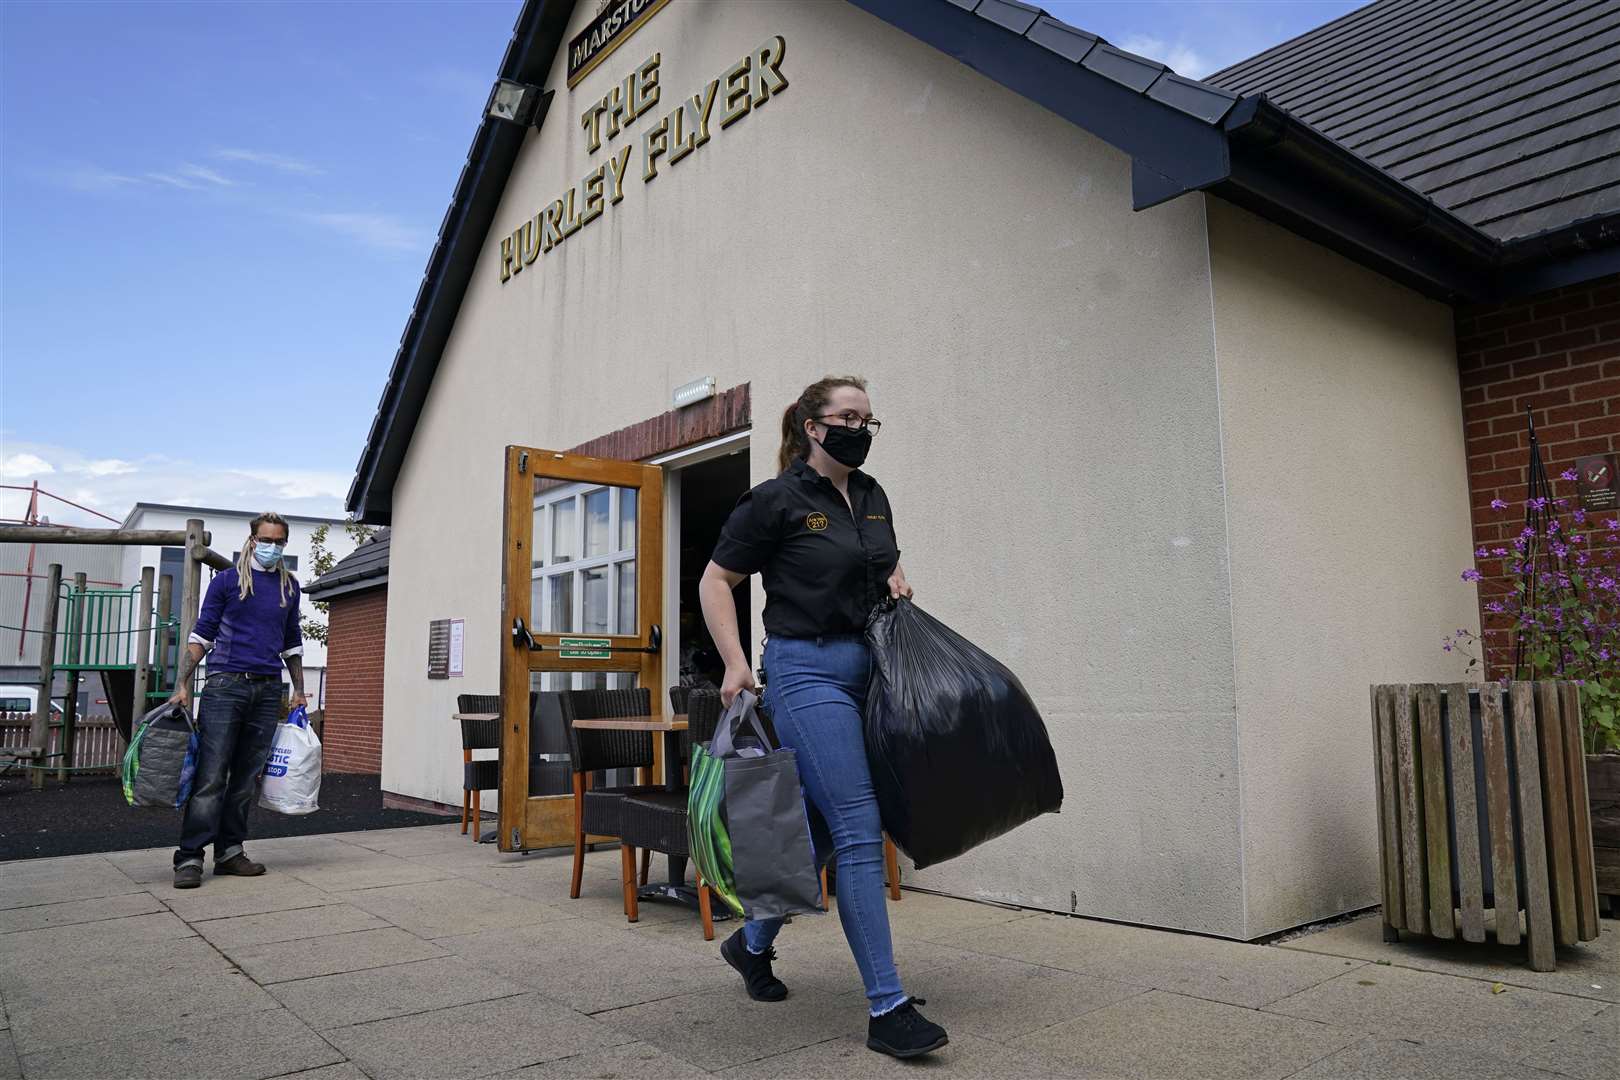 Staff carry bags of donations at the Hurley Flyer pub in Morecambe (Danny Lawson/PA)